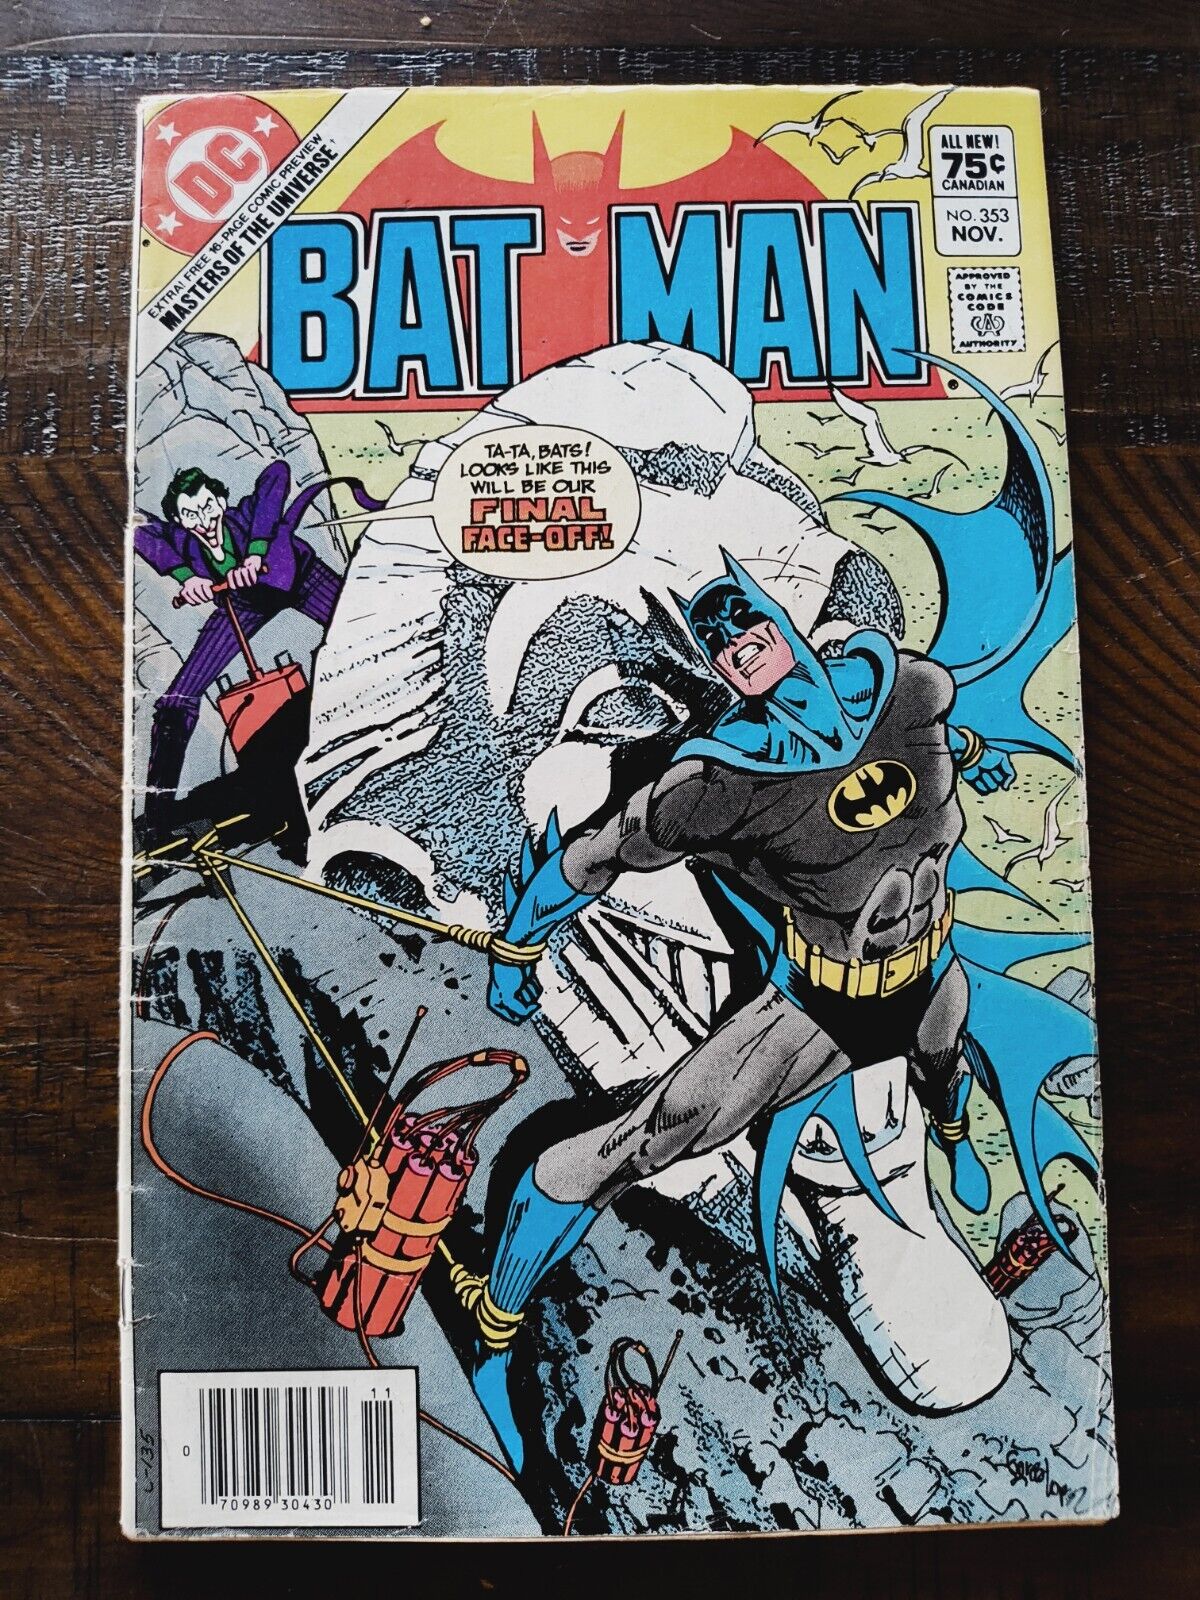 BATMAN #353 JOKER COVER PREVIEW MASTERS OF THE UNIVERSE 1982